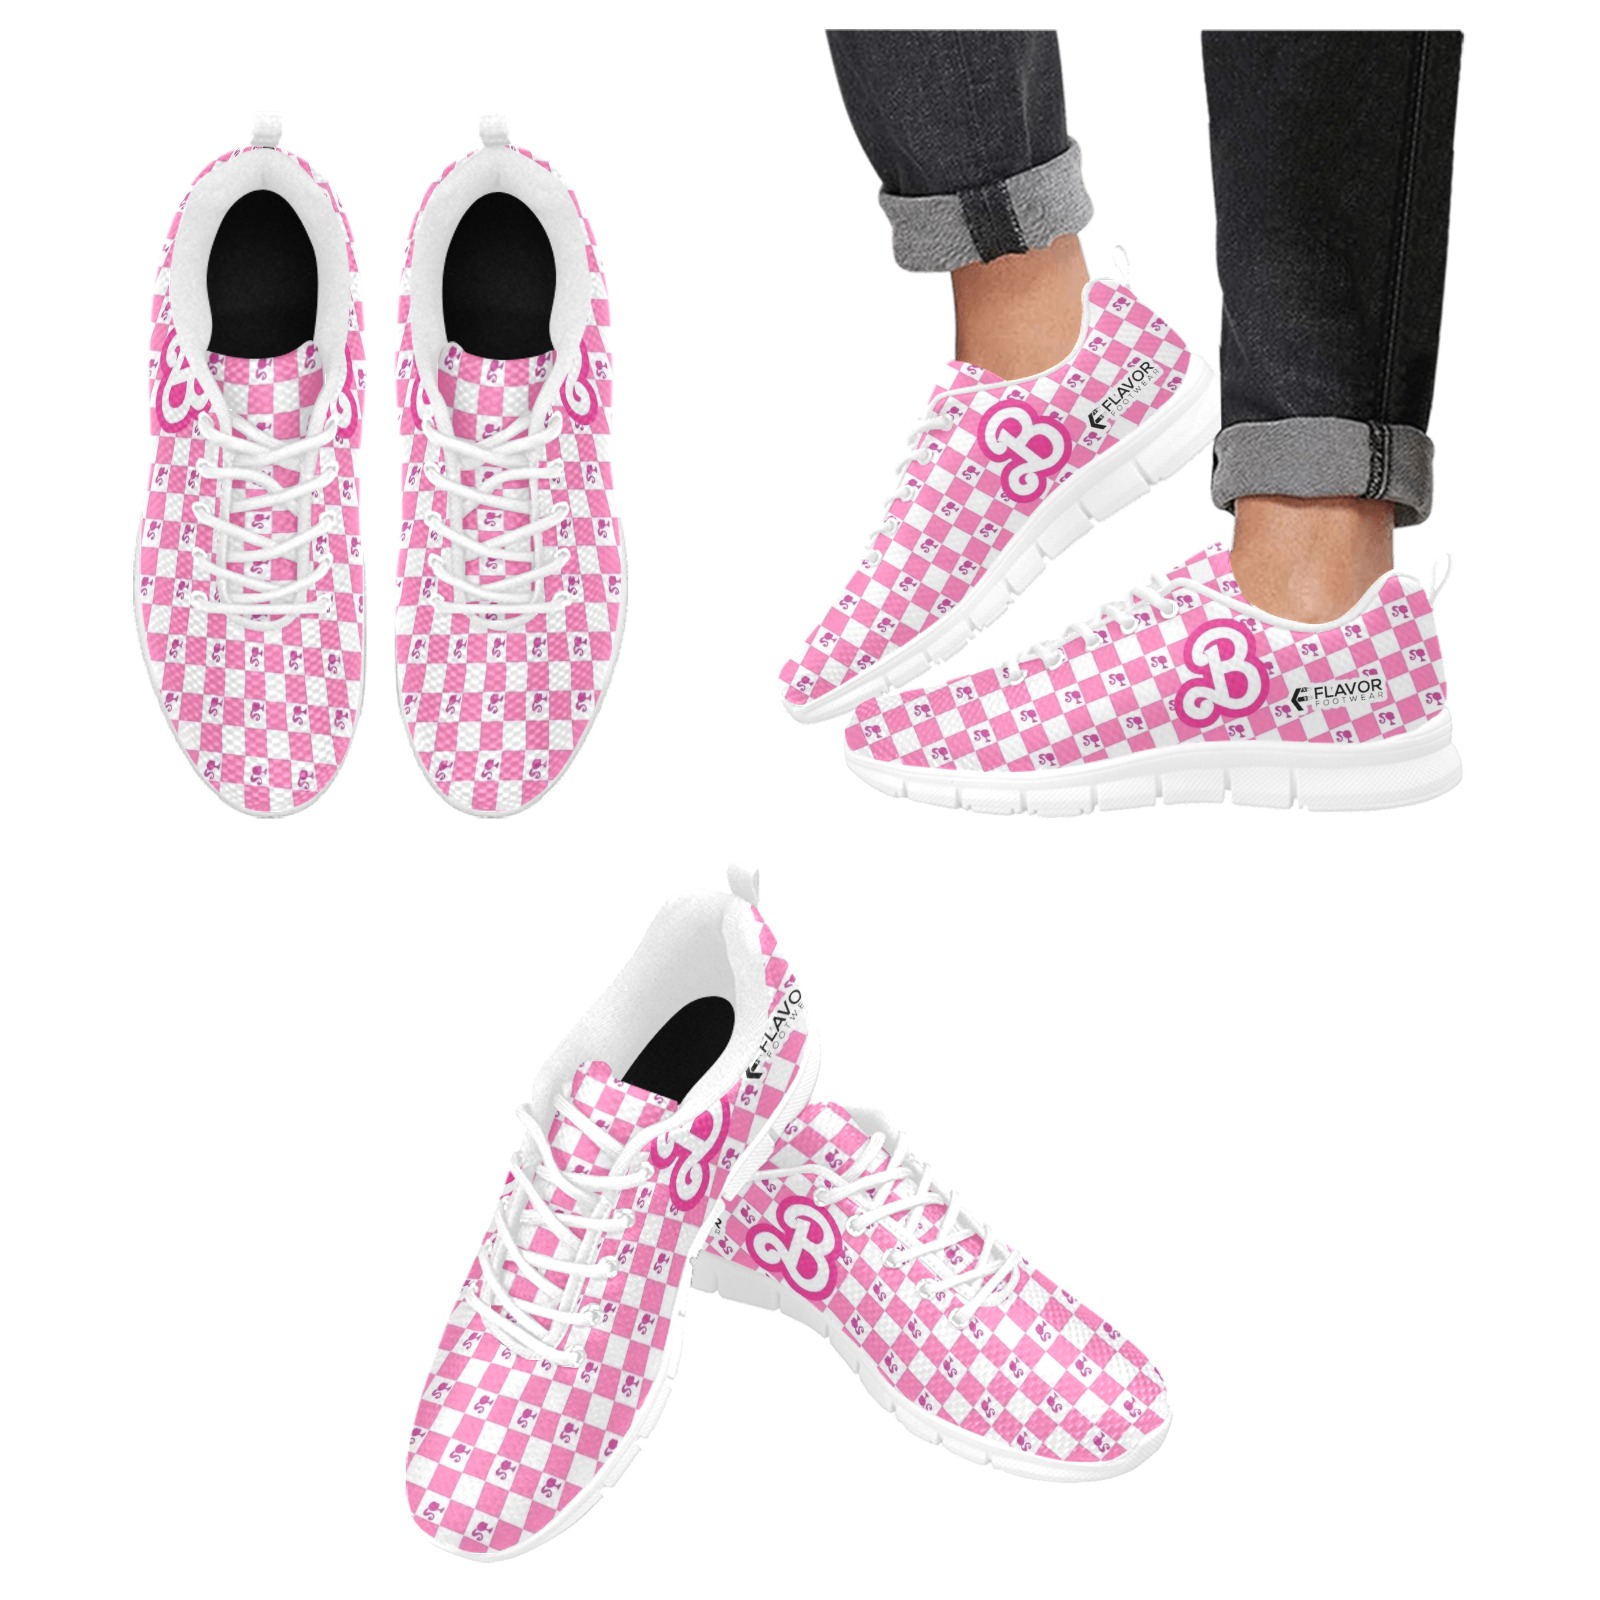 Bubblegum Pink Sneaker Collection 02 Women's Breathable Running Shoes (Model 055)